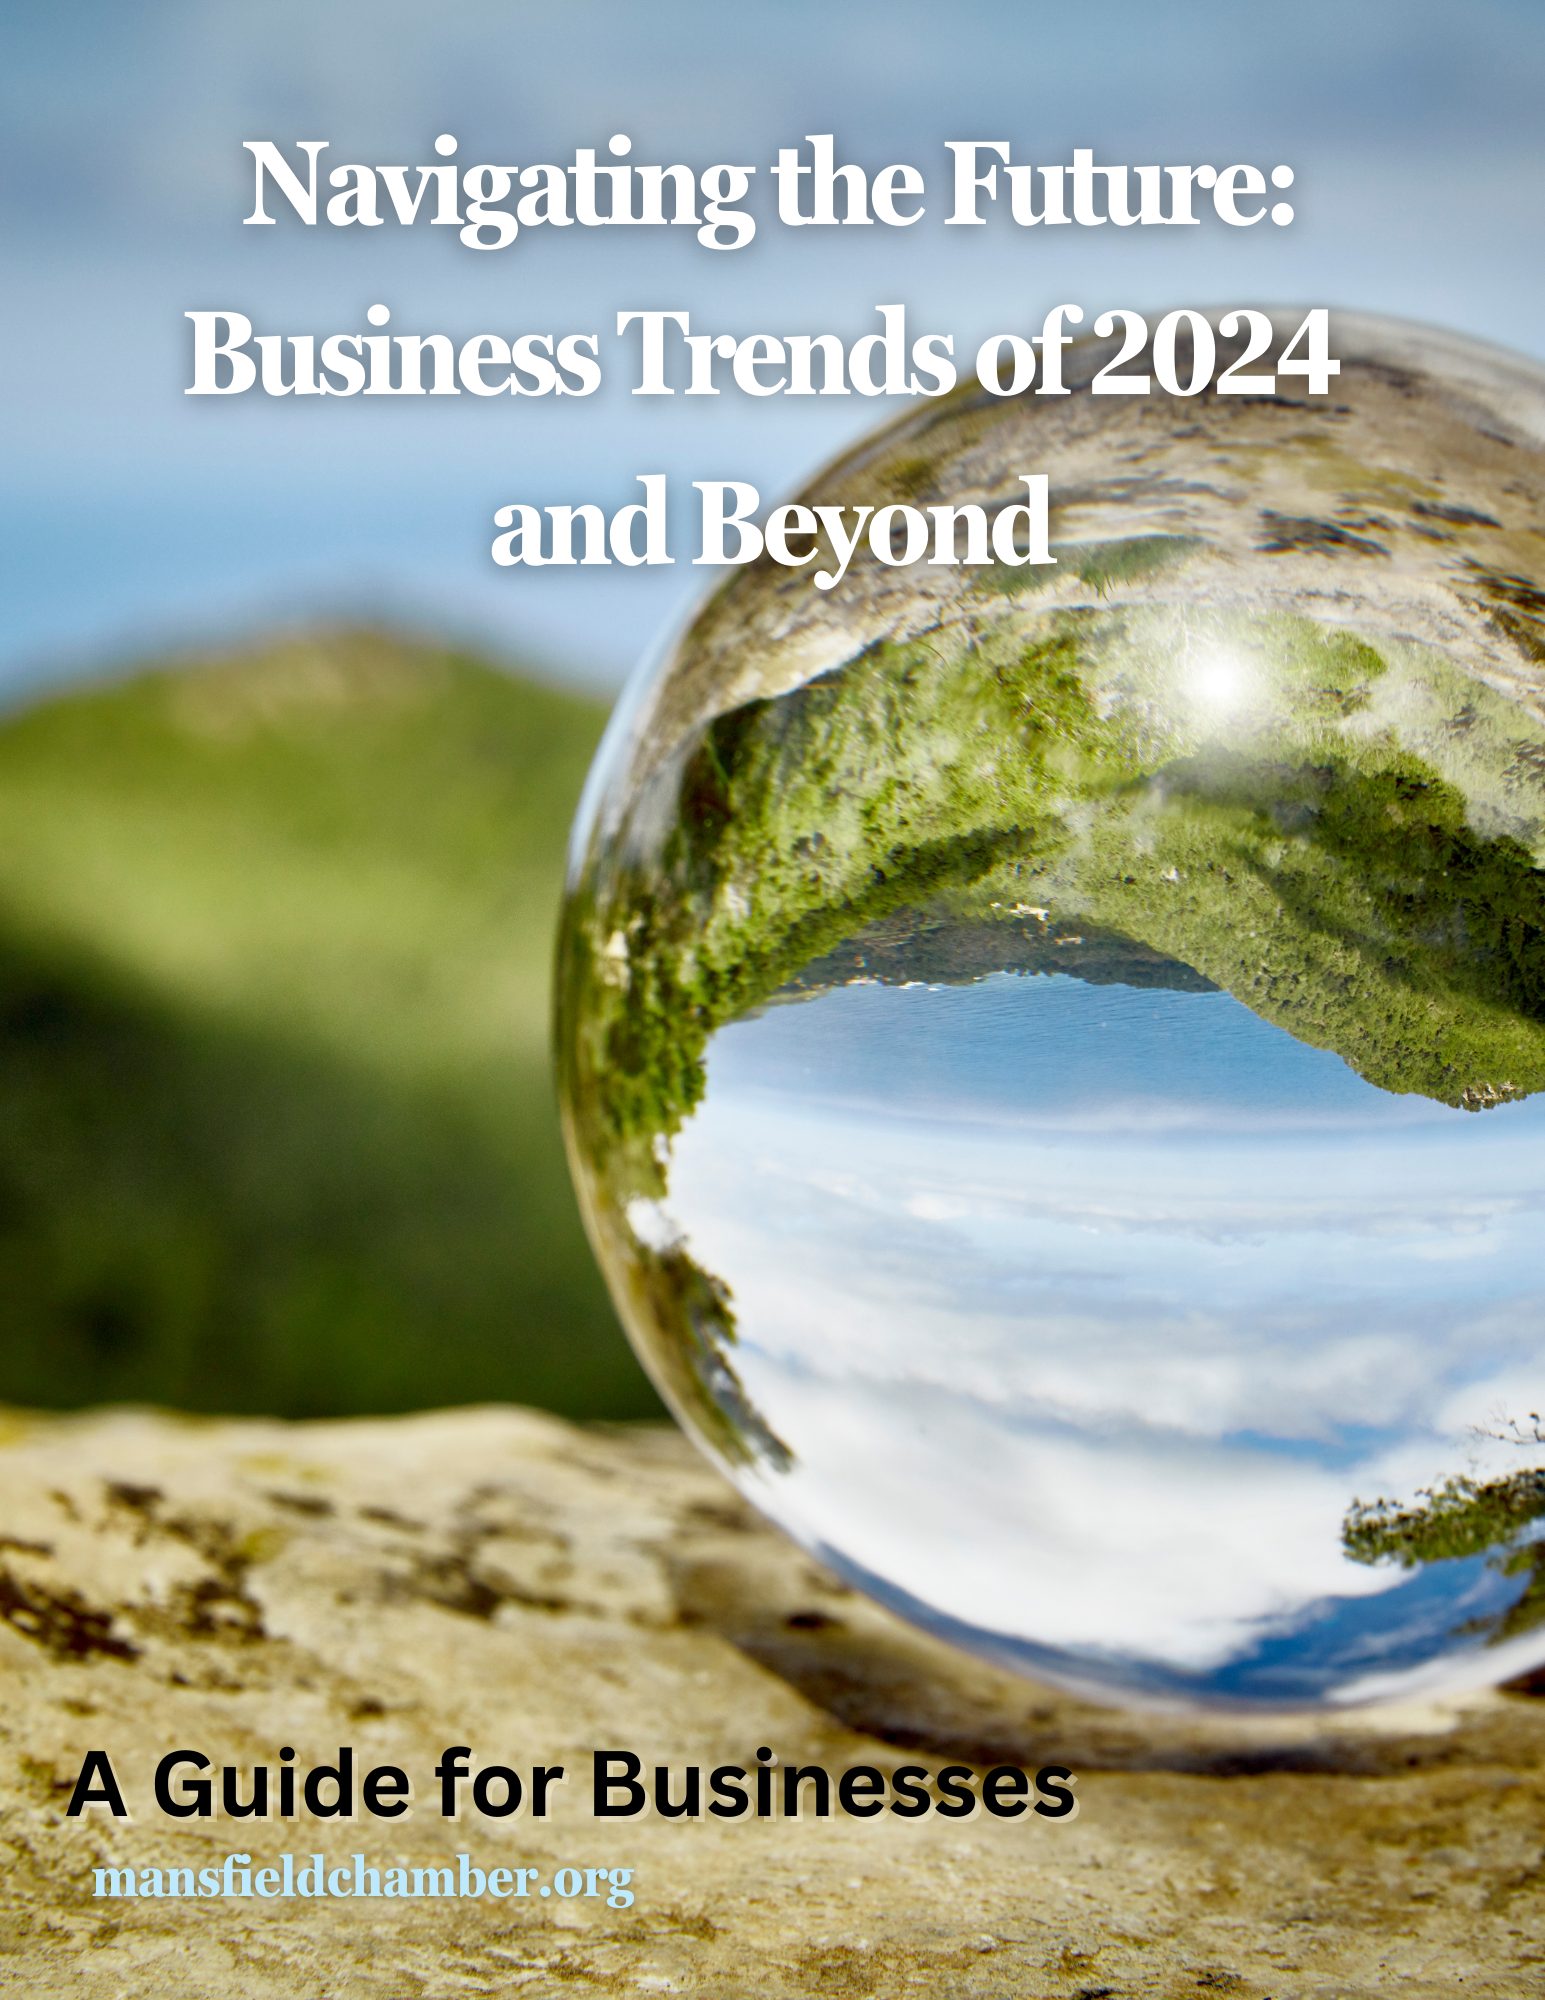 Navigating the Future Business Trends of 2024 and Beyond